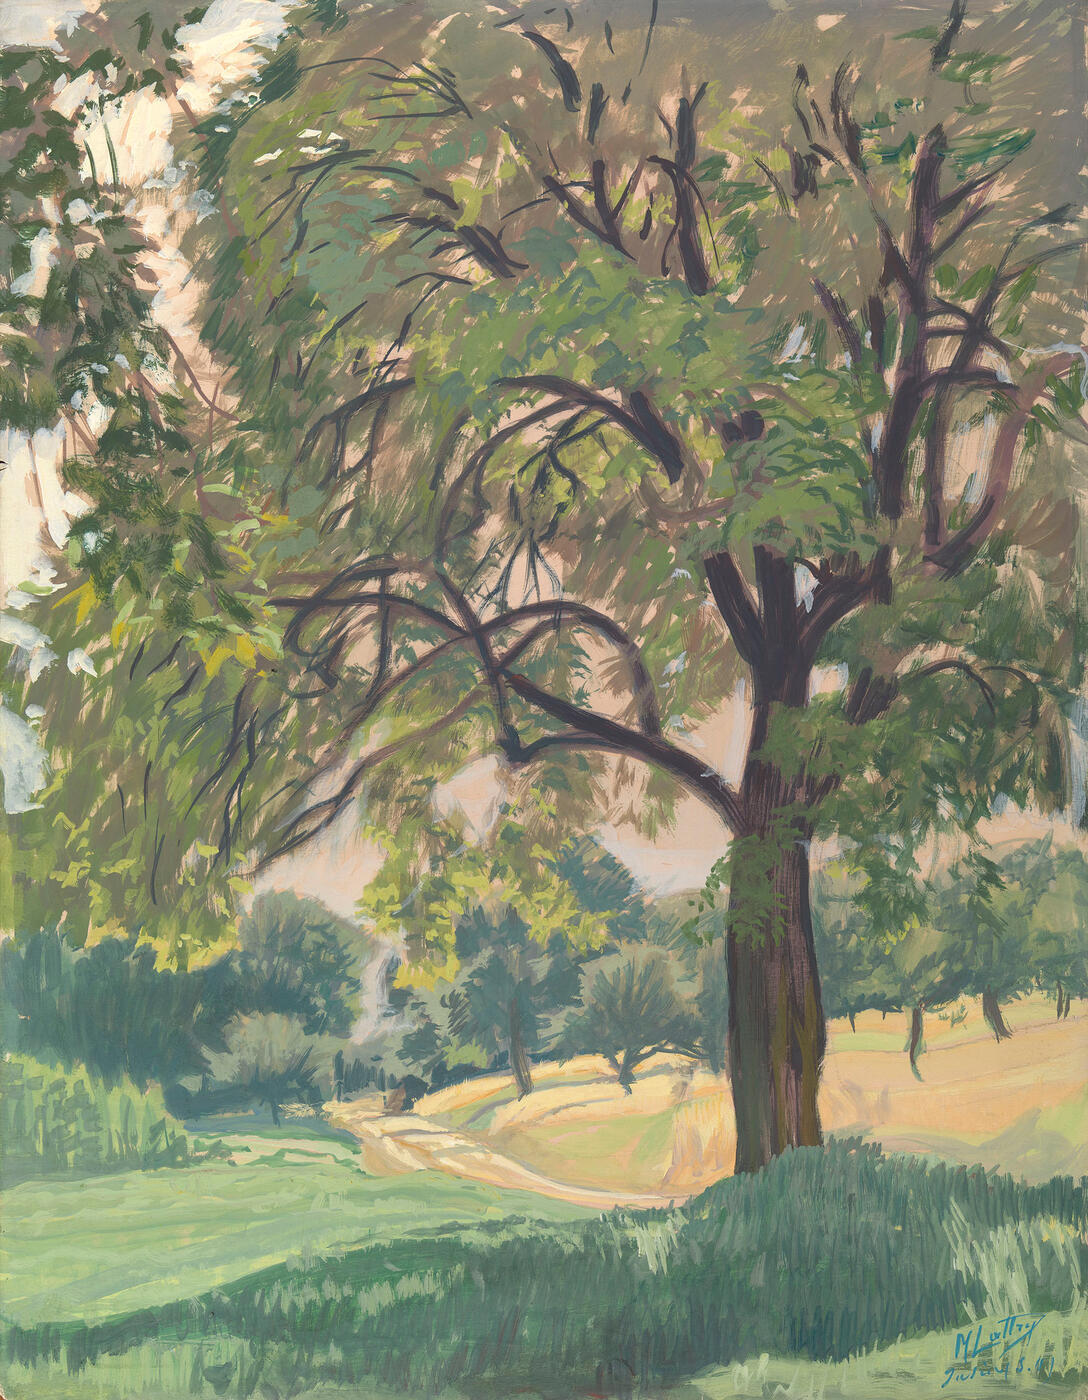 Landscape with an Old Tree